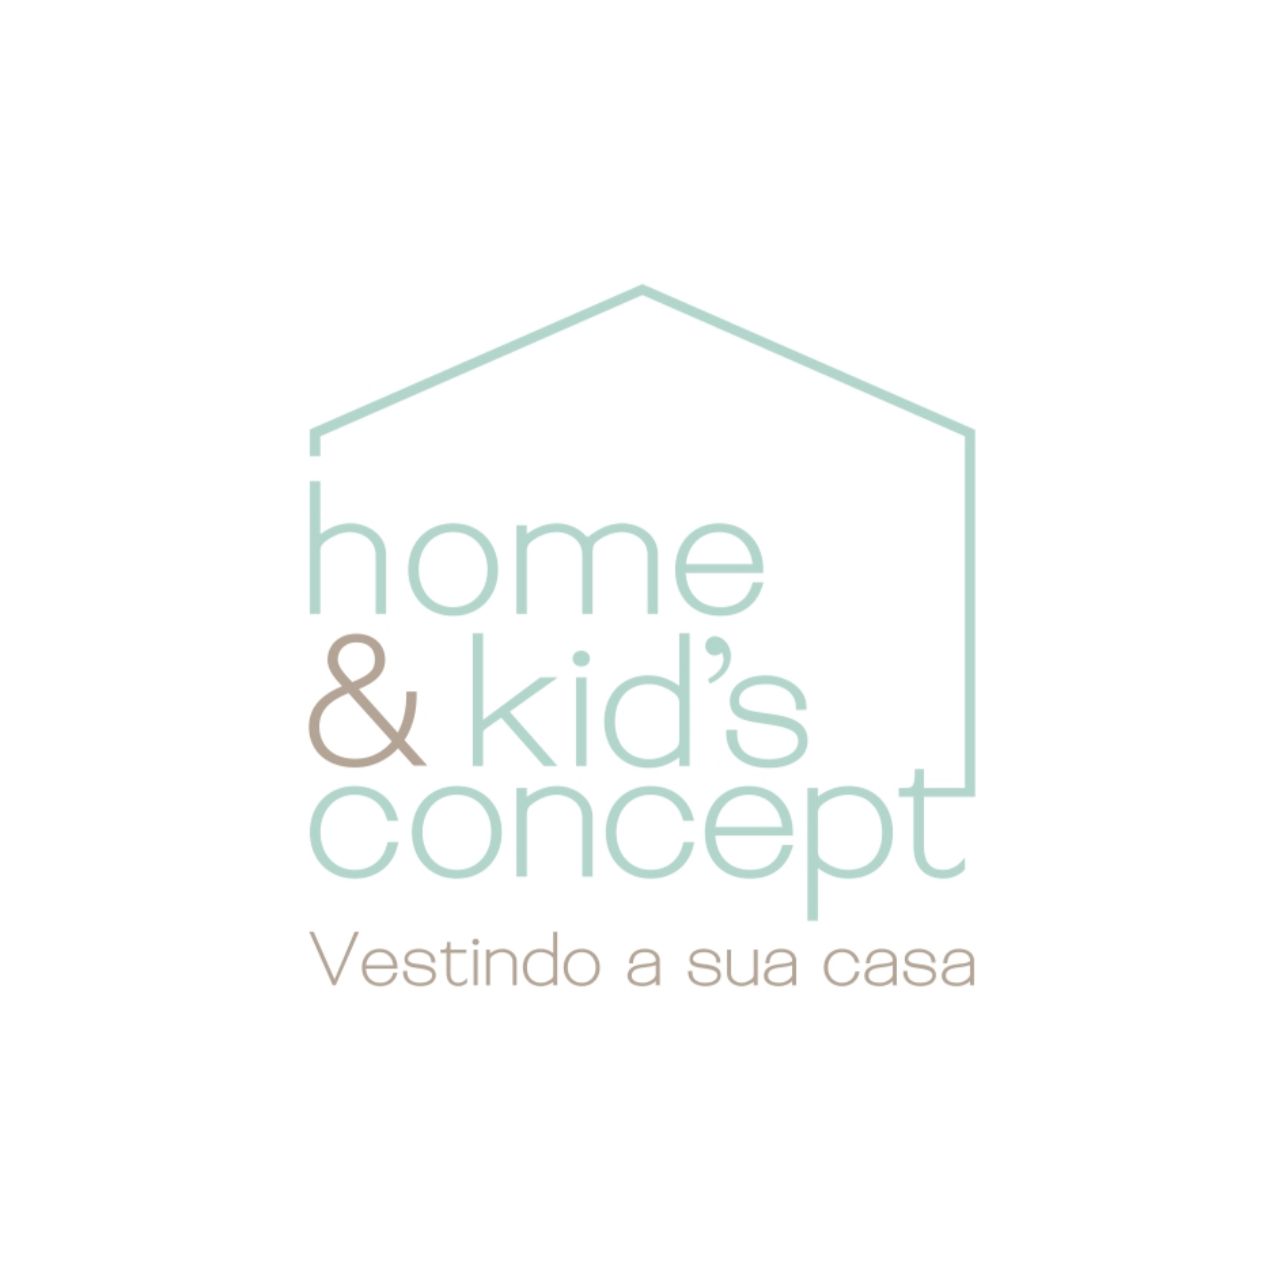 Home & Kid's Concept